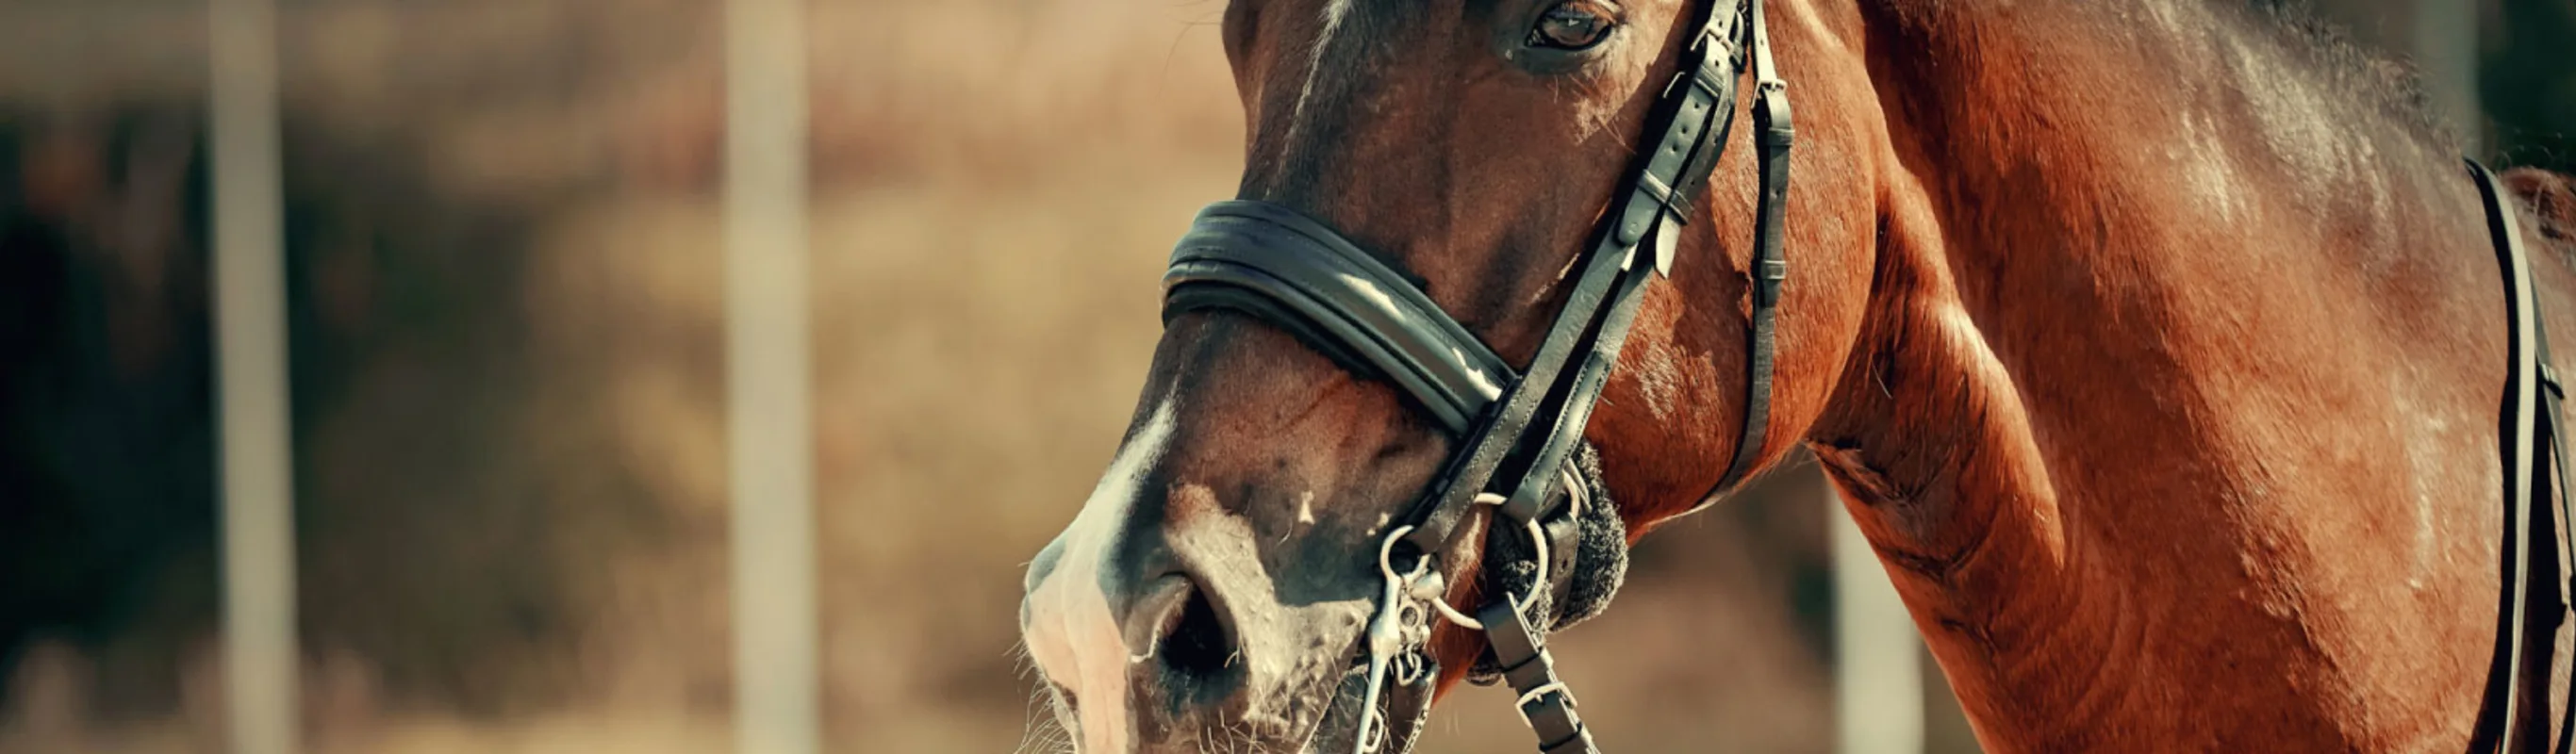 Close up of a horse's head with a bridle